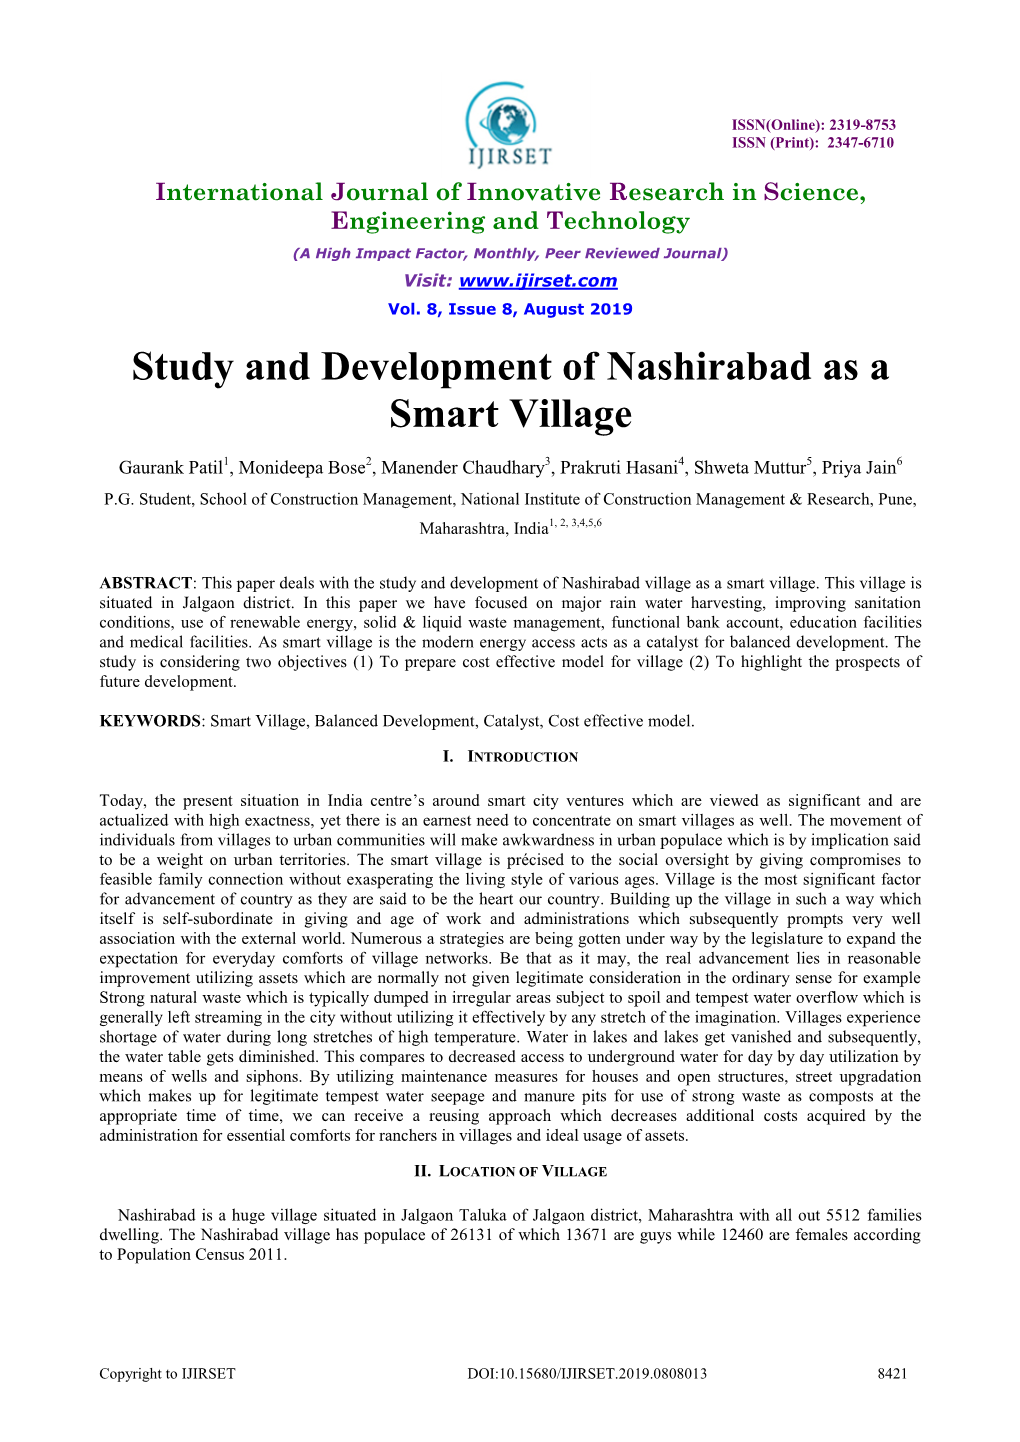 Study and Development of Nashirabad As a Smart Village